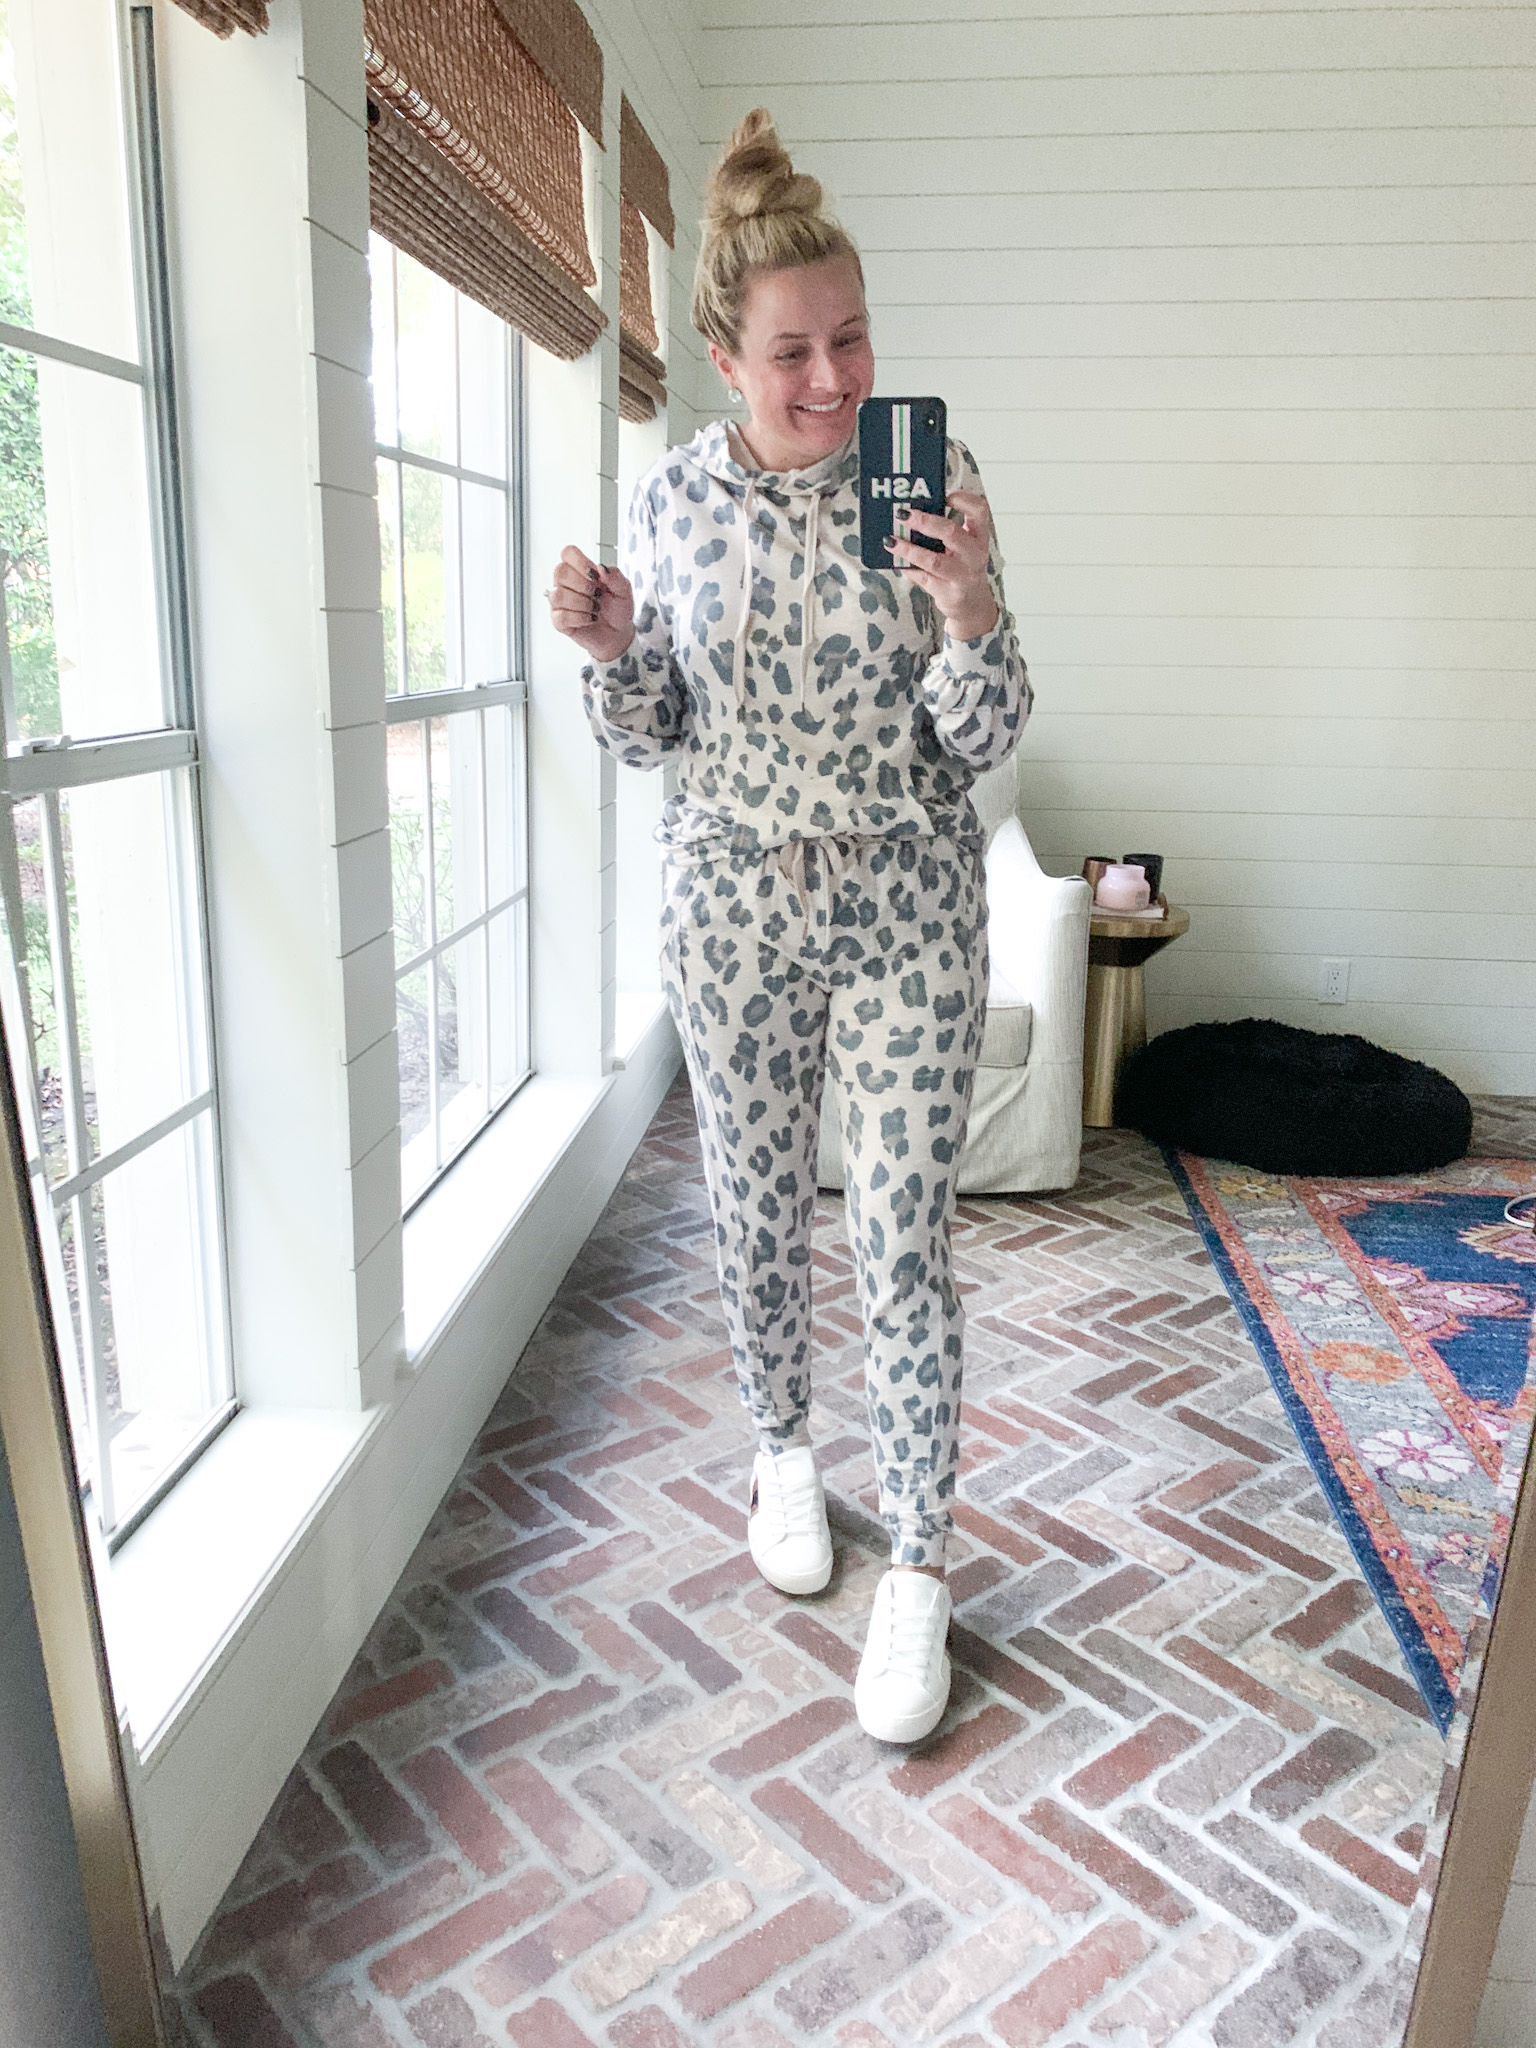 Fall Clothing by popular Houston fashion blog, Fancy Ashley: image of a woman wearing a Walmart Scoop Women's Animal Printed Joggers with Front Seaming, Walmart Scoop Women's Leopard Print French Terry Hoodie, and a pair of Walmart Time and Tru Women’s Fashion Sneakers.